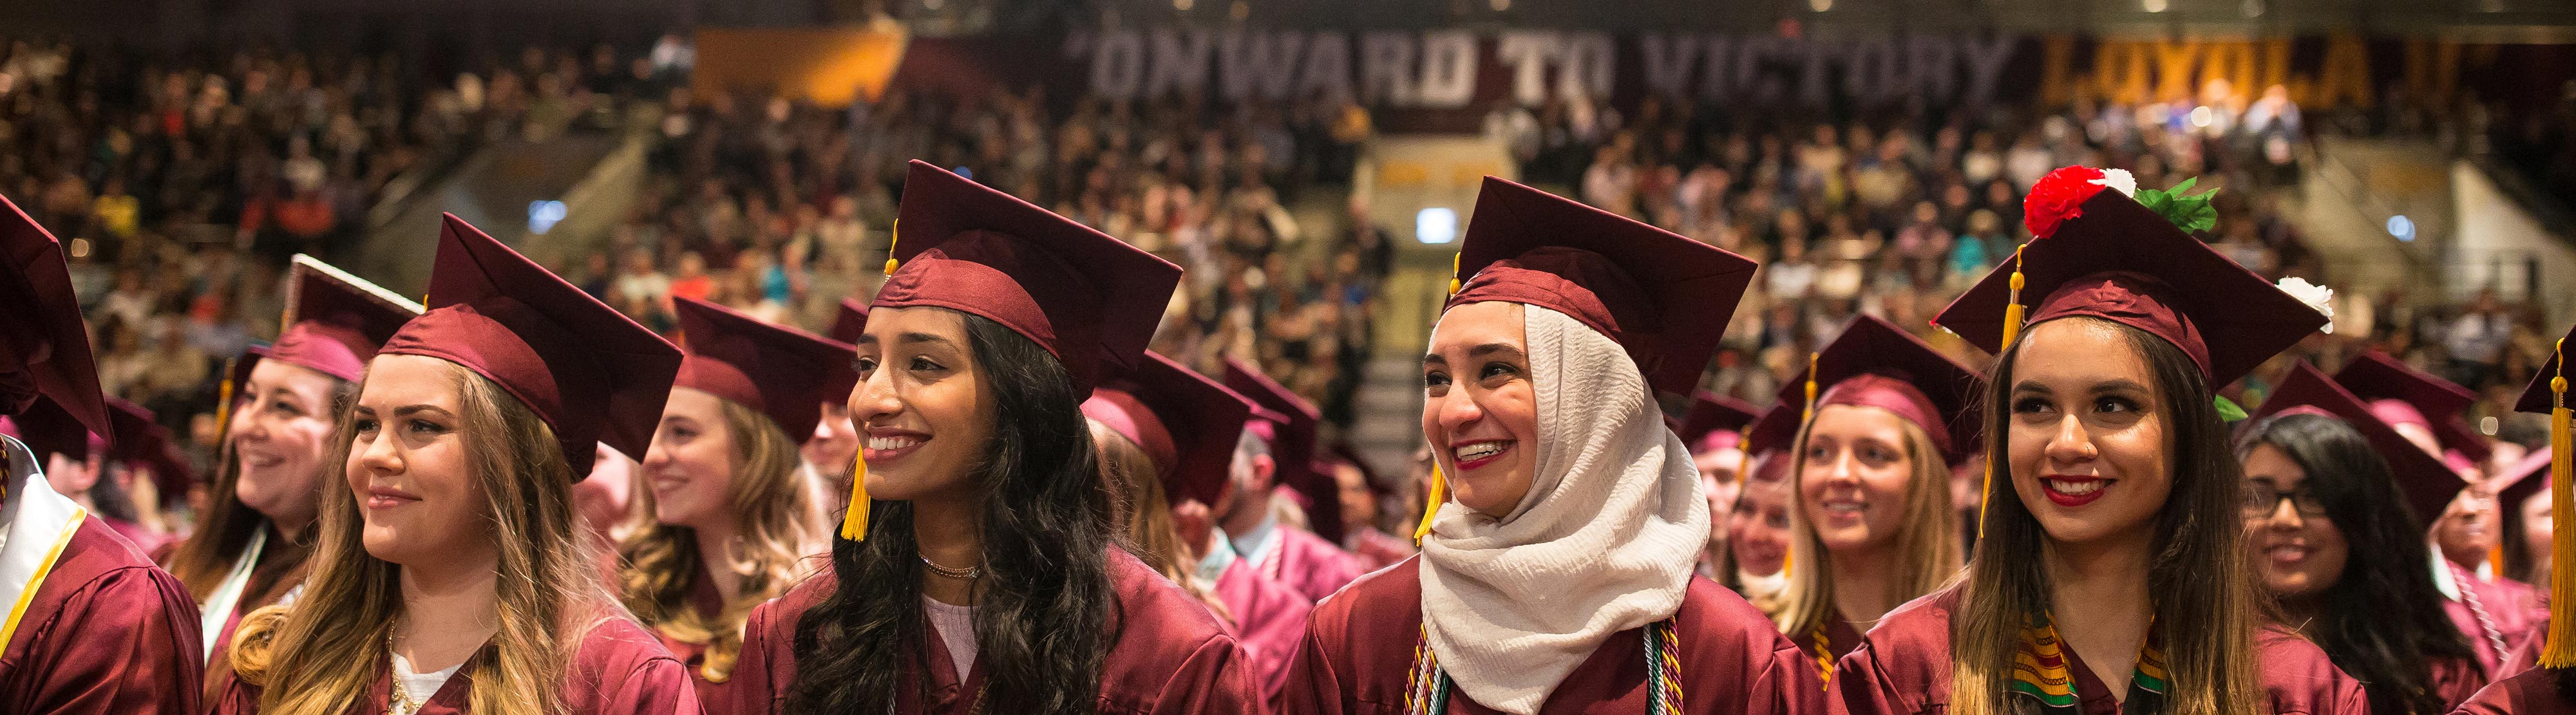 Loyola University Chicago students at commencement